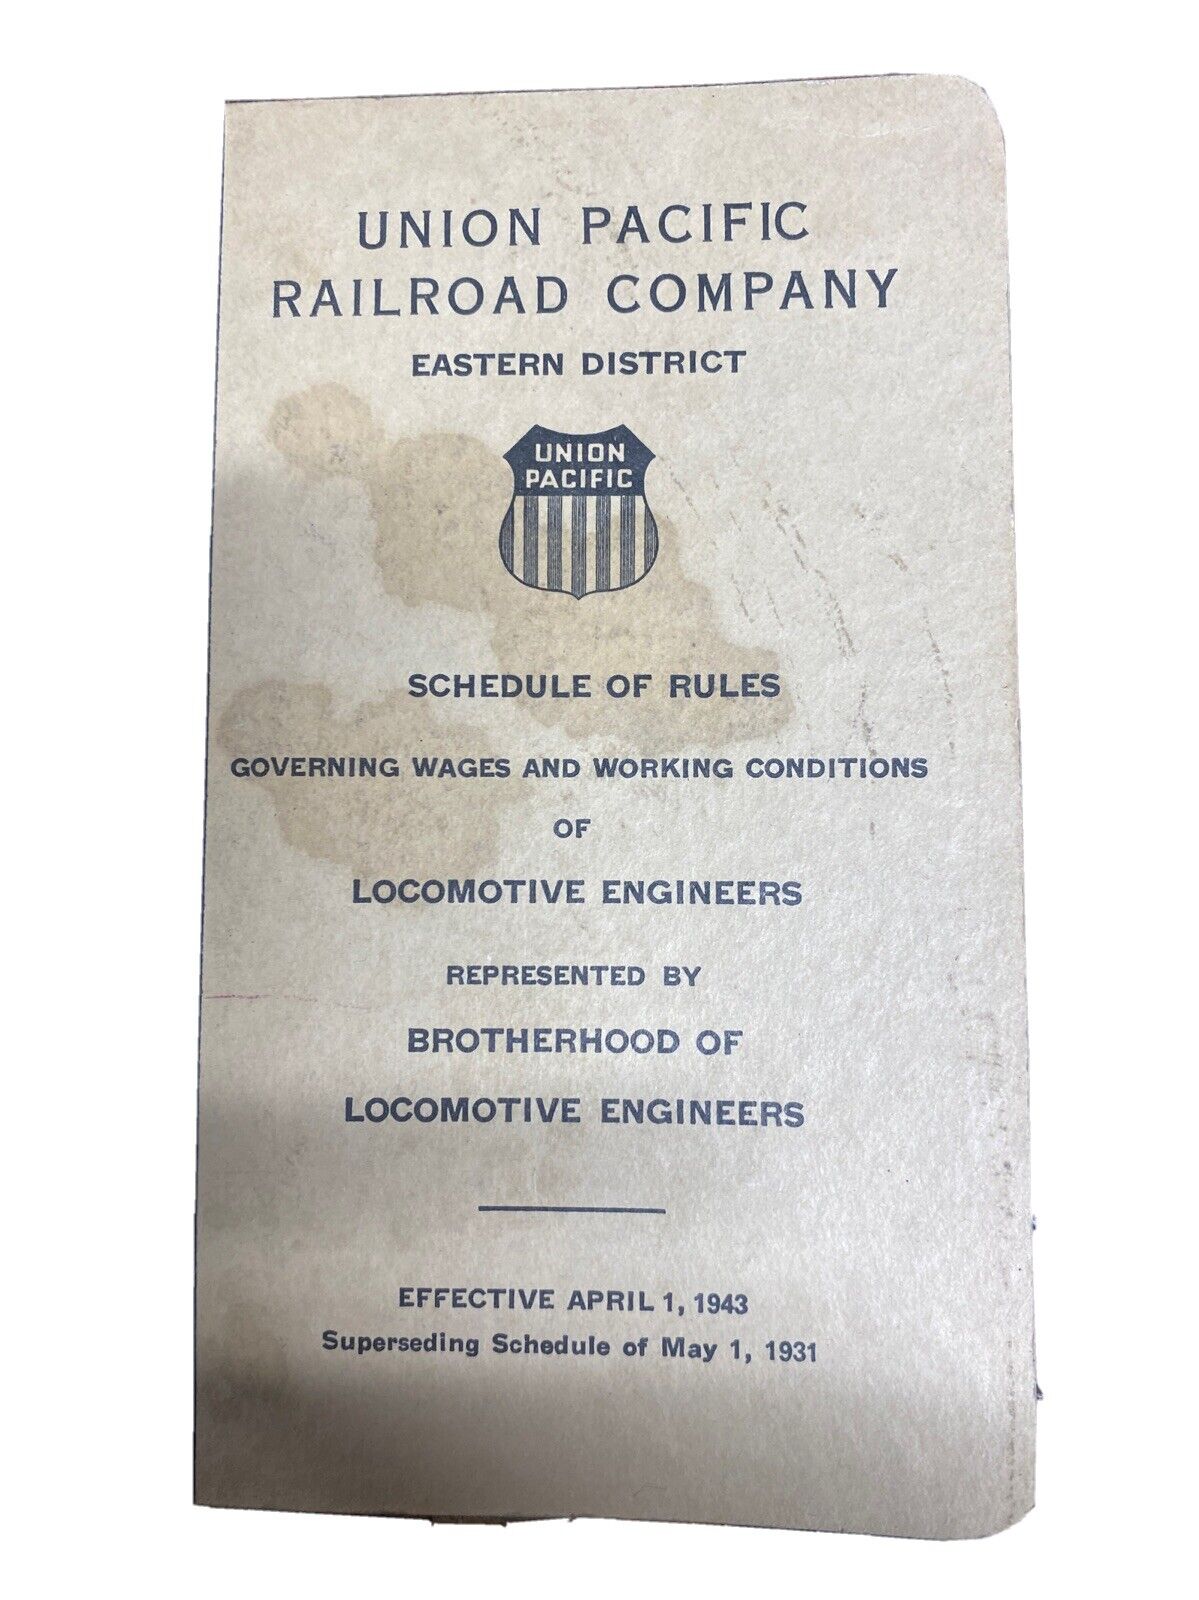 Vintage Union pacific railroad company schedule of rules and books